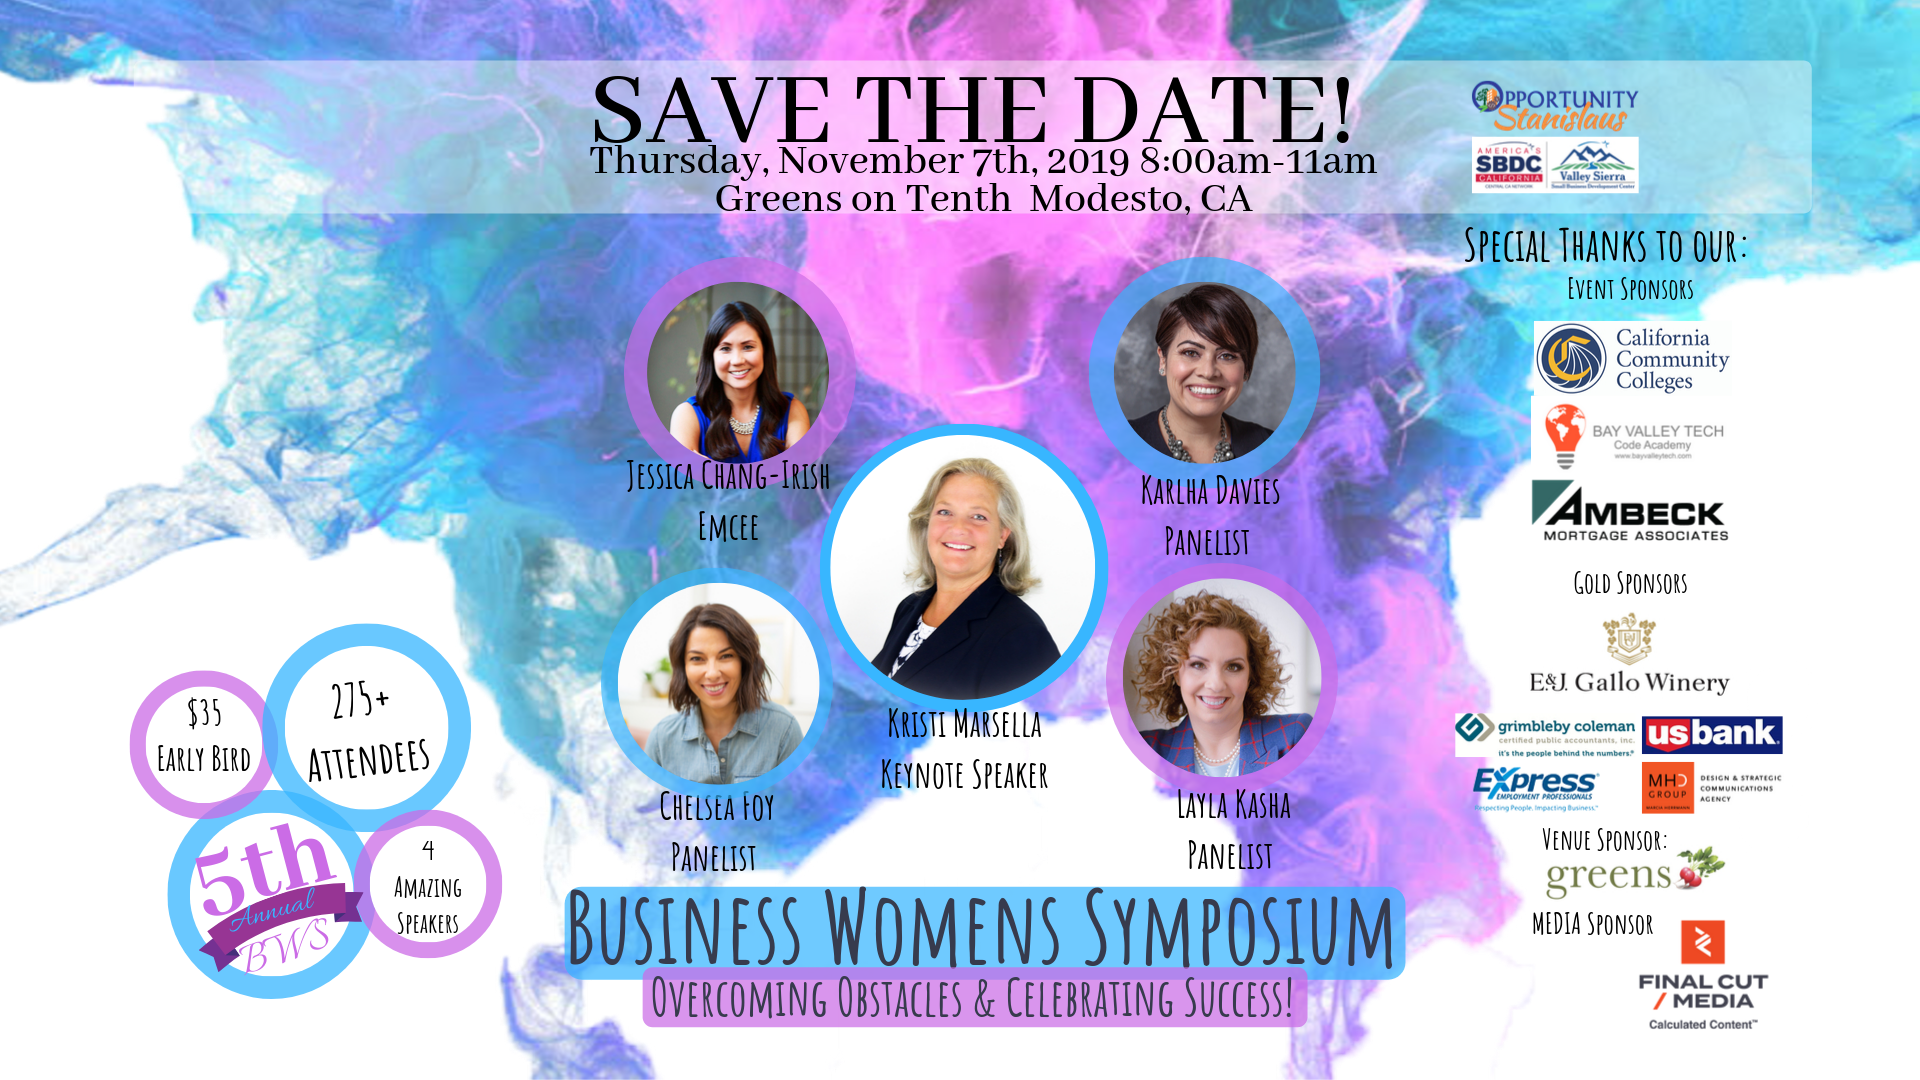 Event Flyer, Business Women's Symposium: Overcoming Obstacles & Celebrating Success Save the Date! Thursday, November 7th. 2019 8:00am- 11am Greens on Tenth, Modesto, Ca.